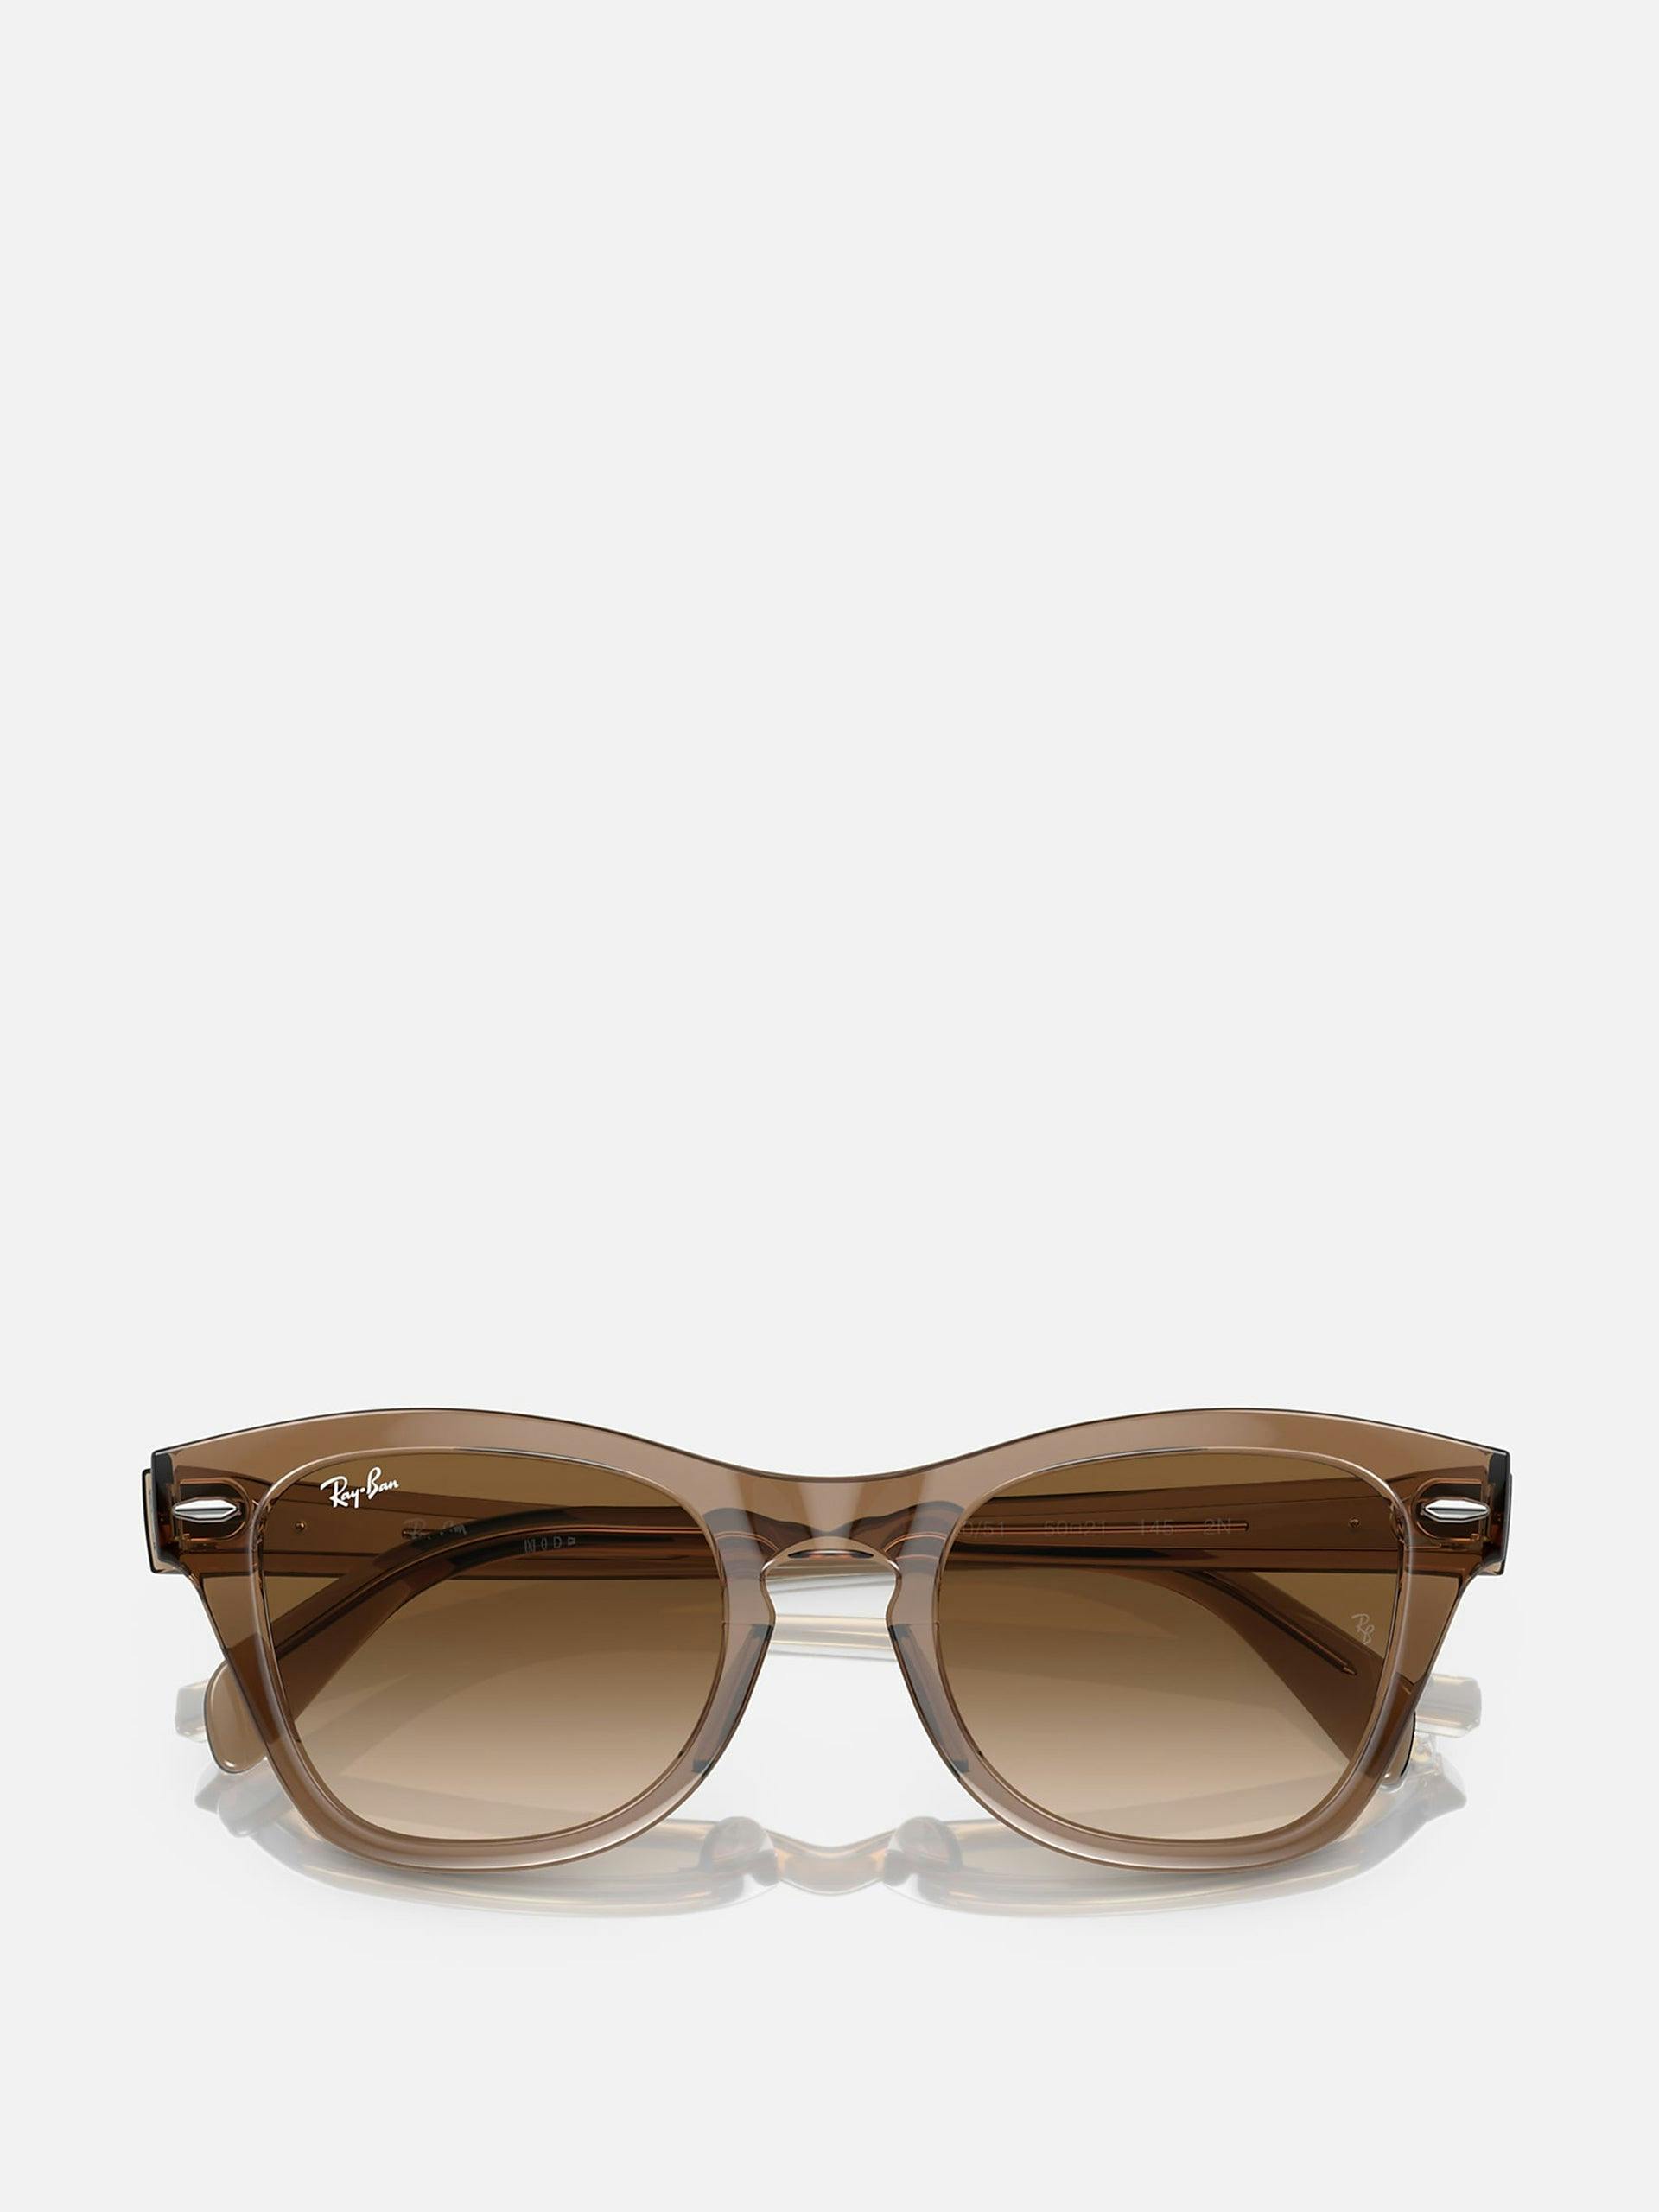 Clear brown sunglasses